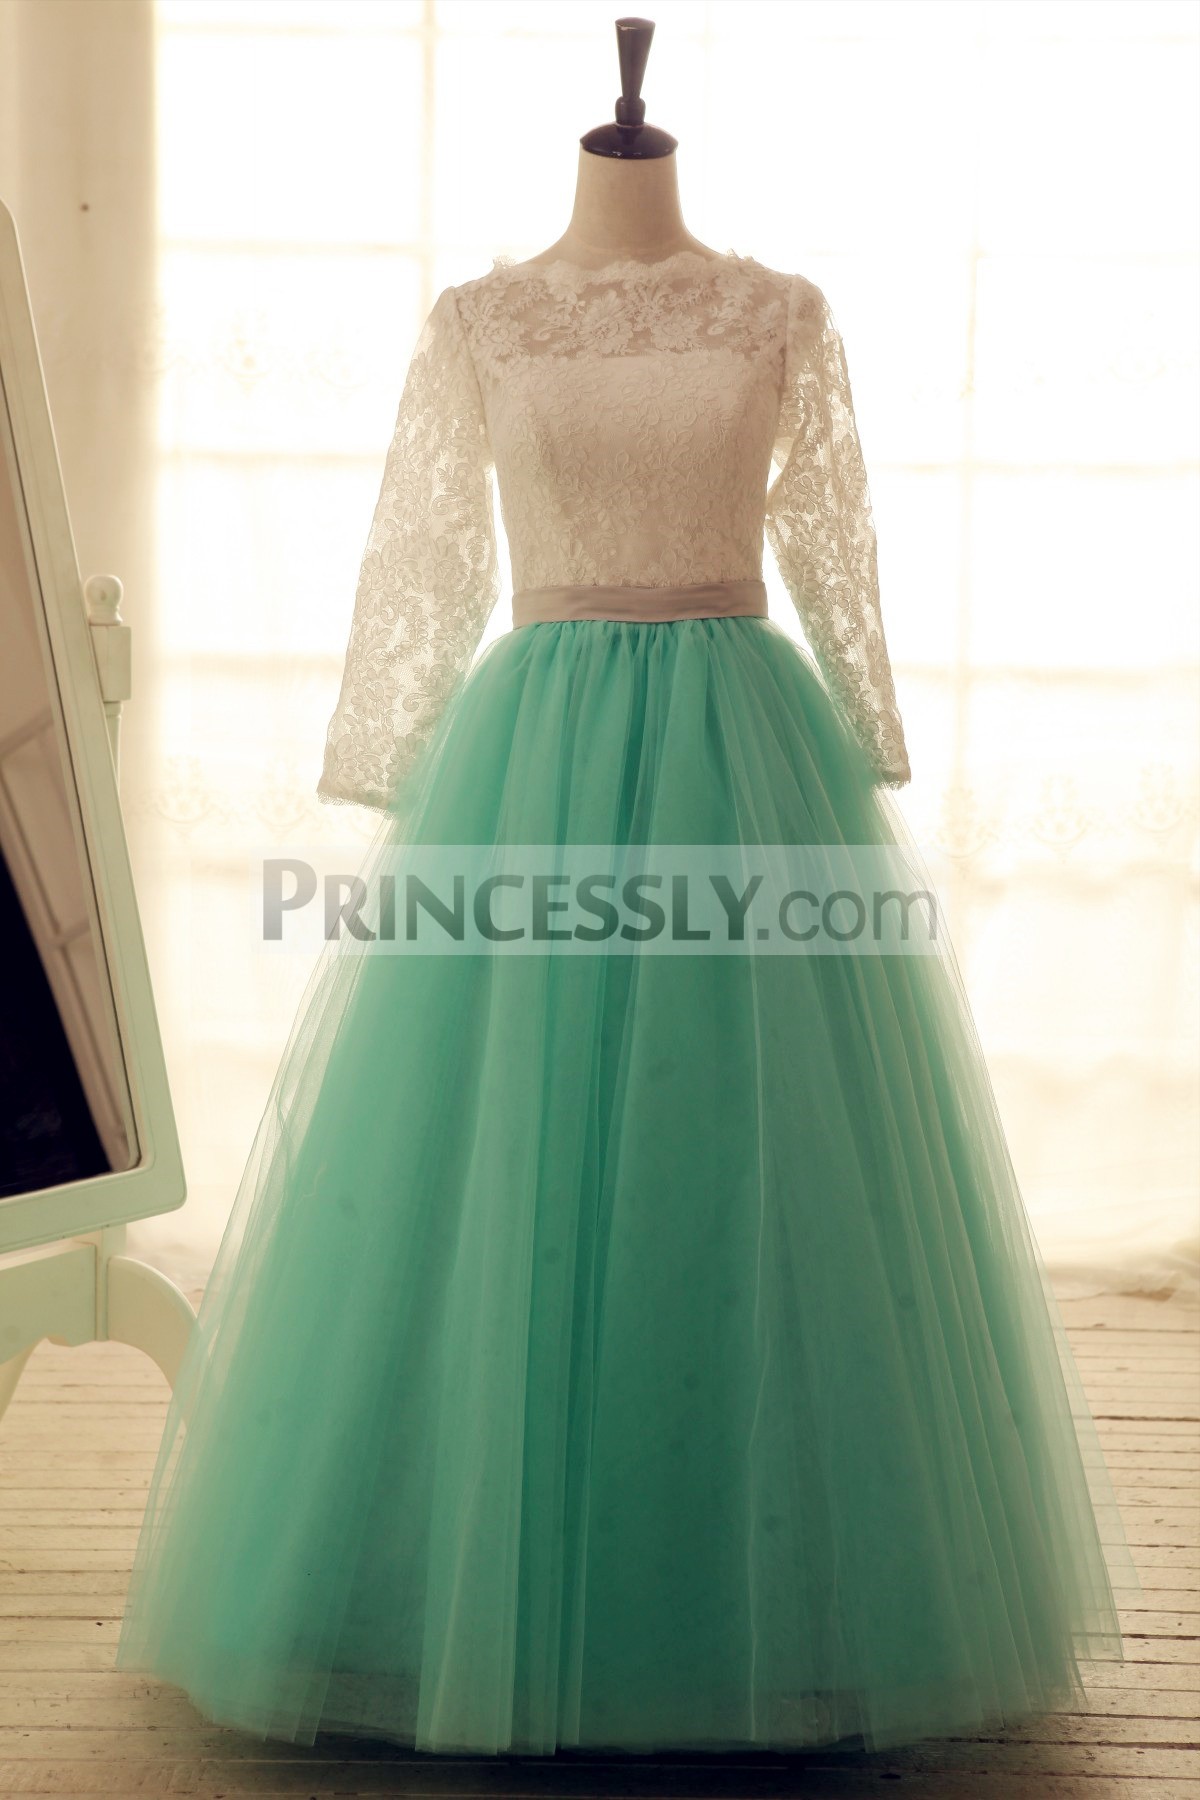 Princessly.com-K1001939-Lace Tulle Wedding Dress Long Lace Sleeves Blue Tulle Ball Gown Dress-31